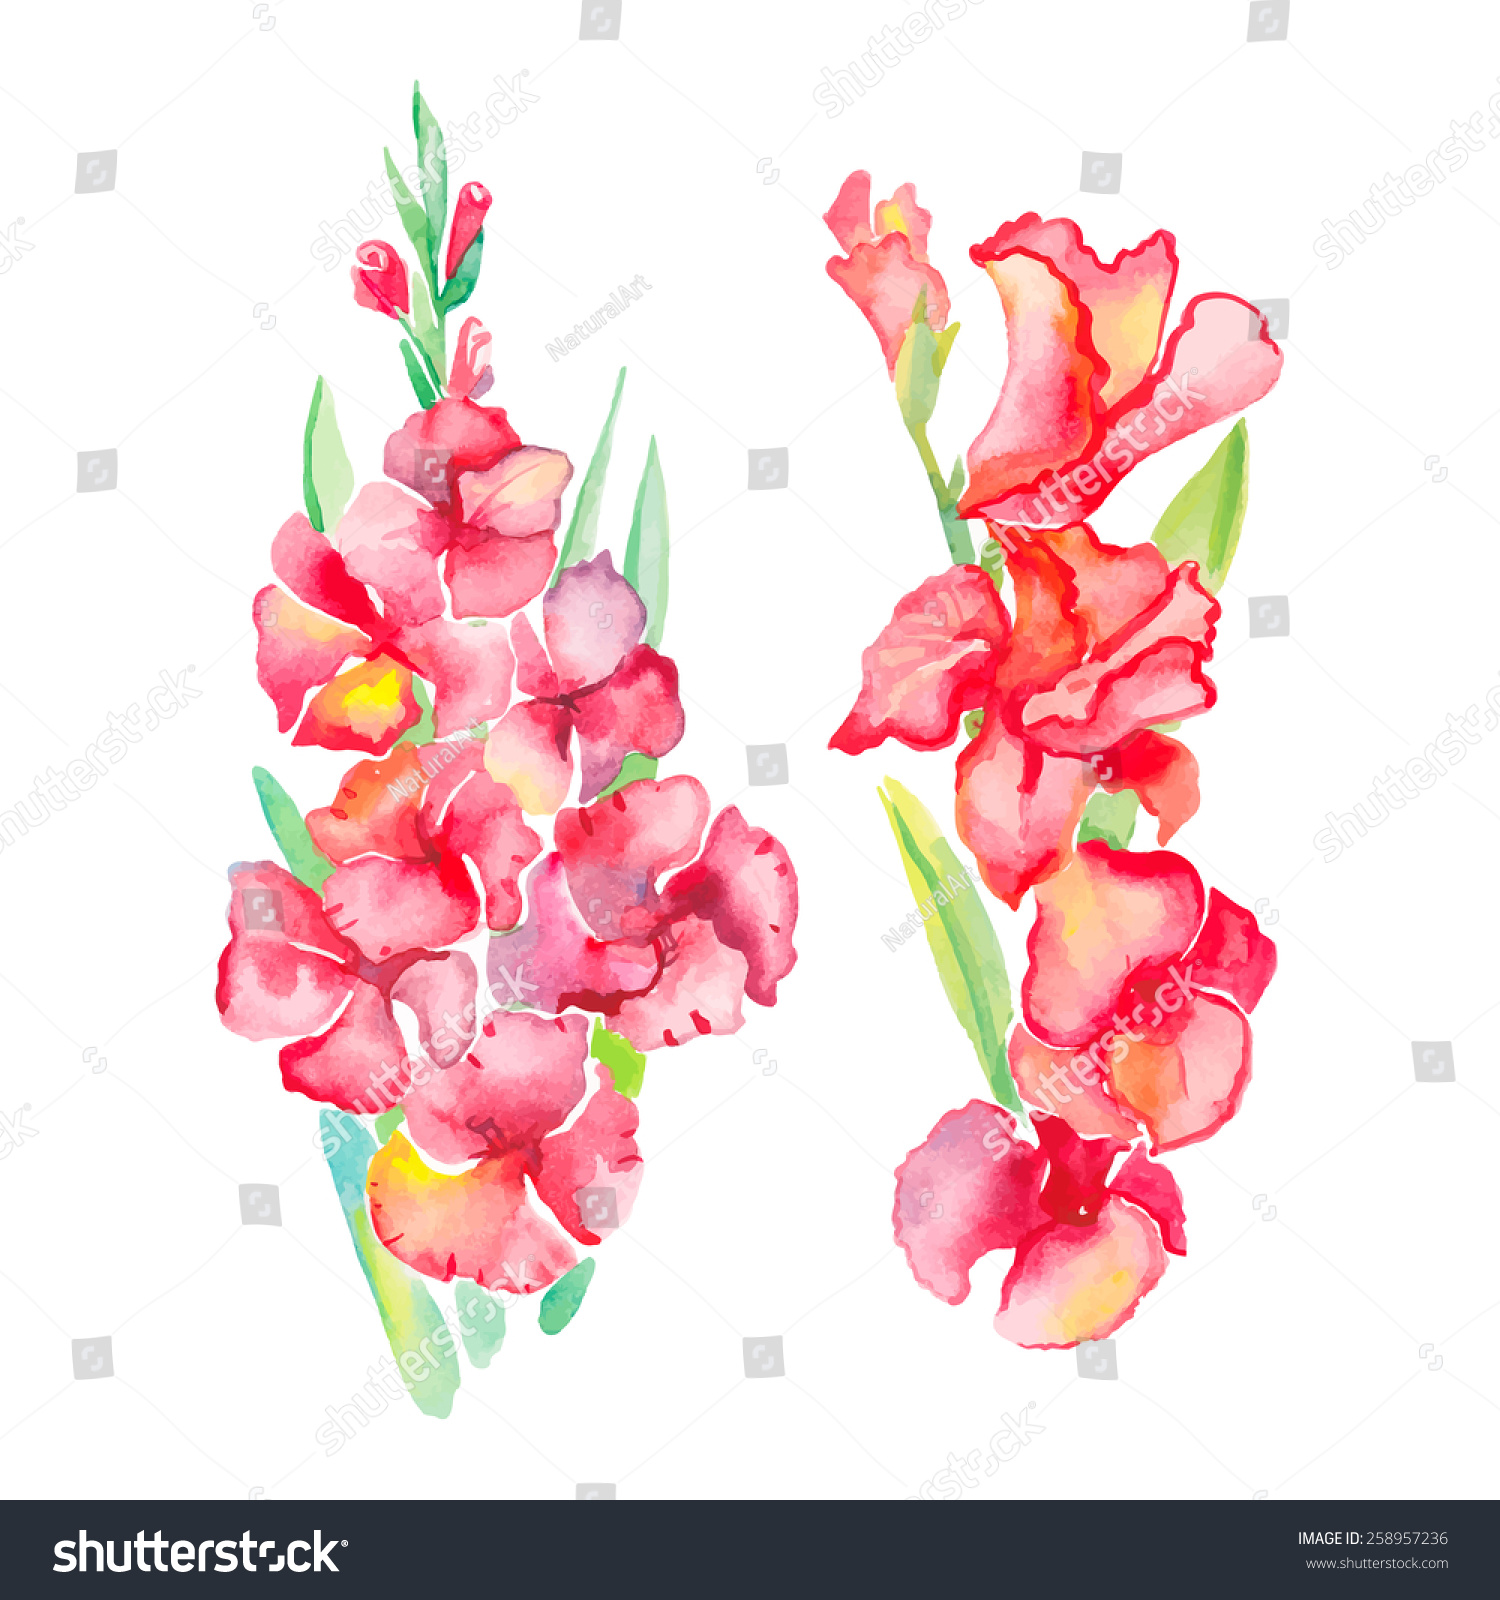 Gladiolus Isolated Flowers Ttropical Flowers Your Stock Illustration ...